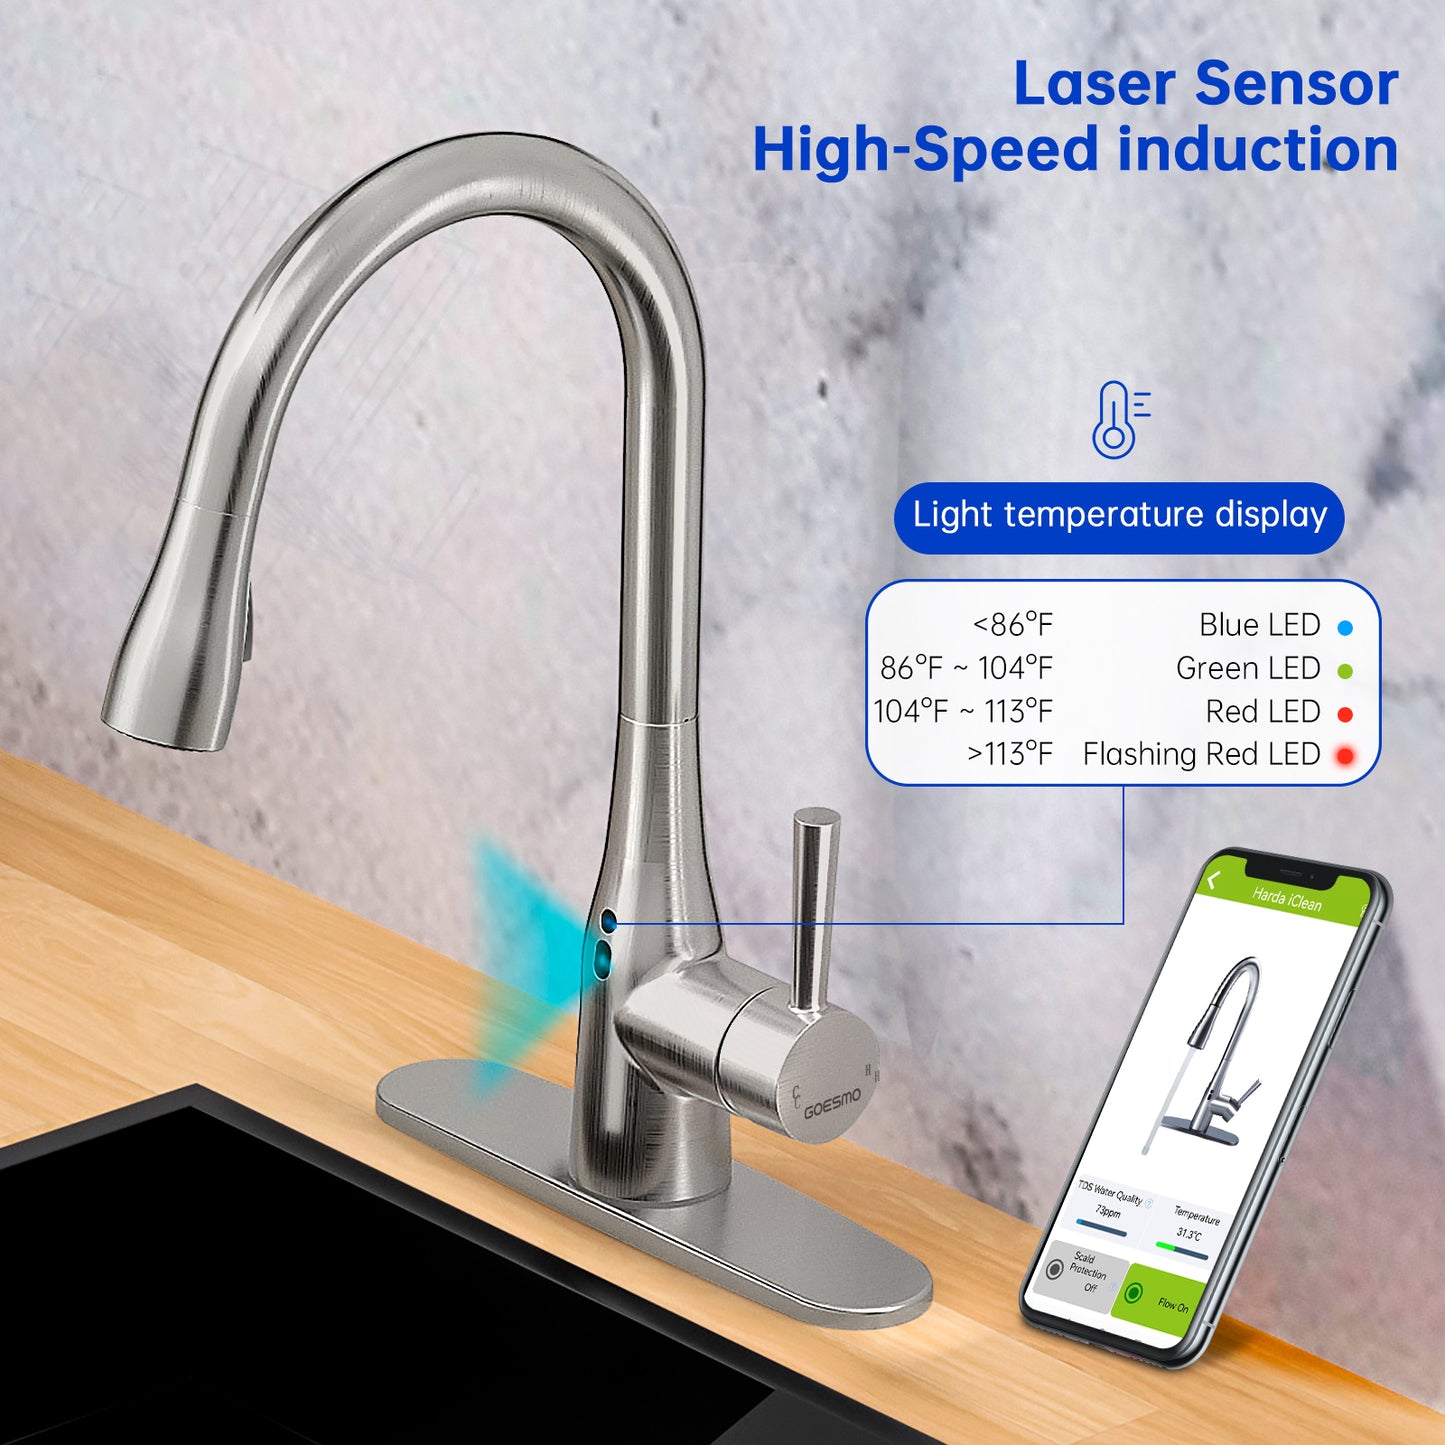 GOESMO 20850 Touchless Single Handle Kitchen Faucet with Pull Down Sprayer